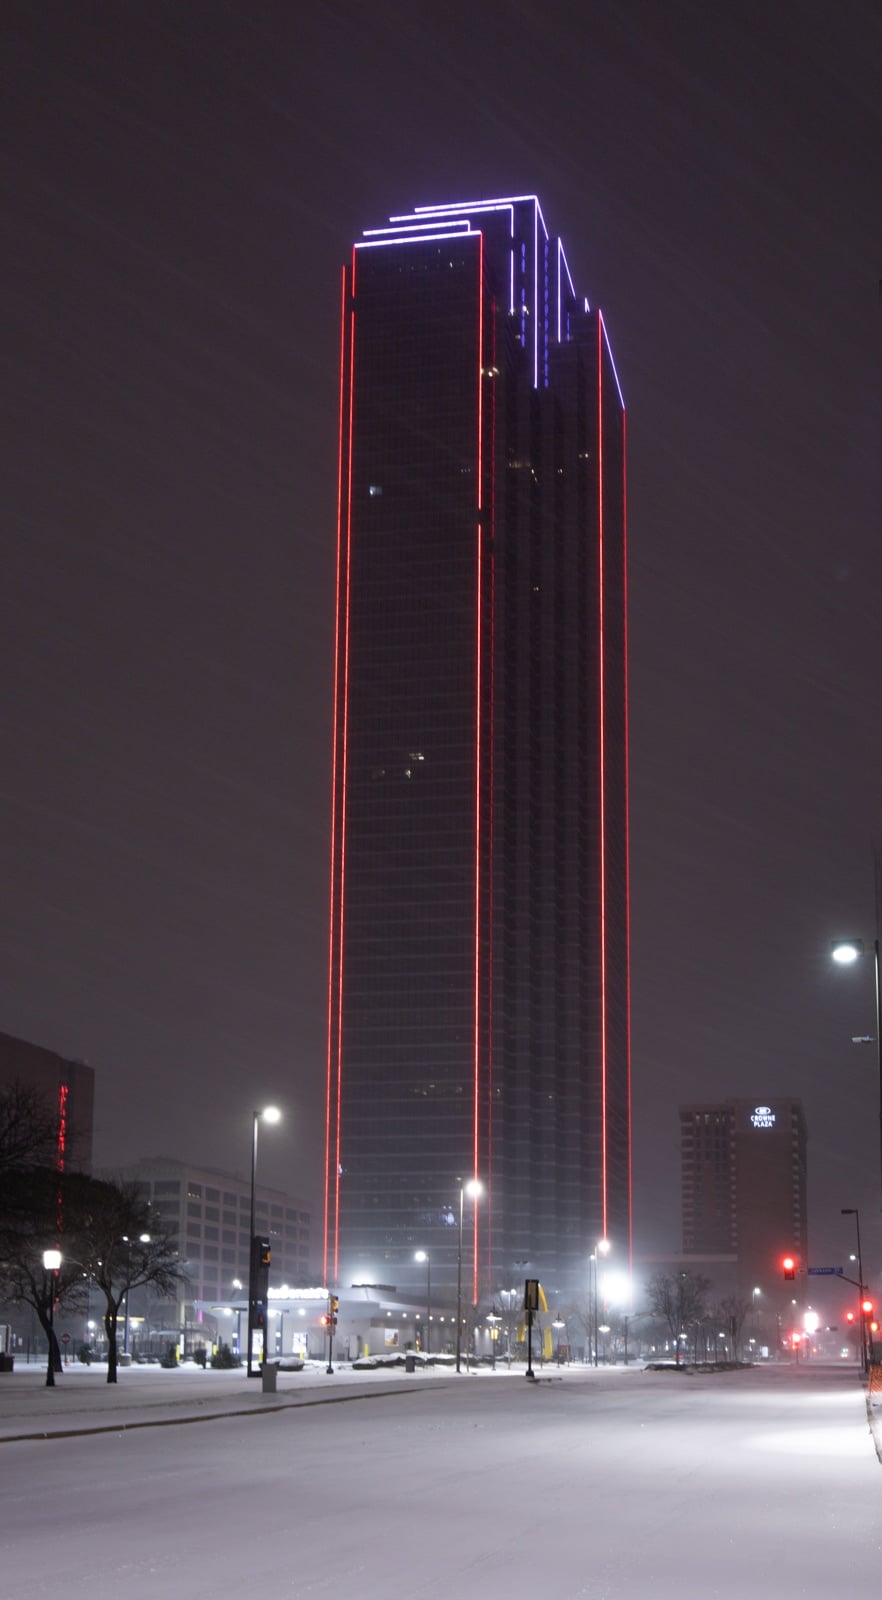 Bank of America Plaza with red lights at night on a snowy evening